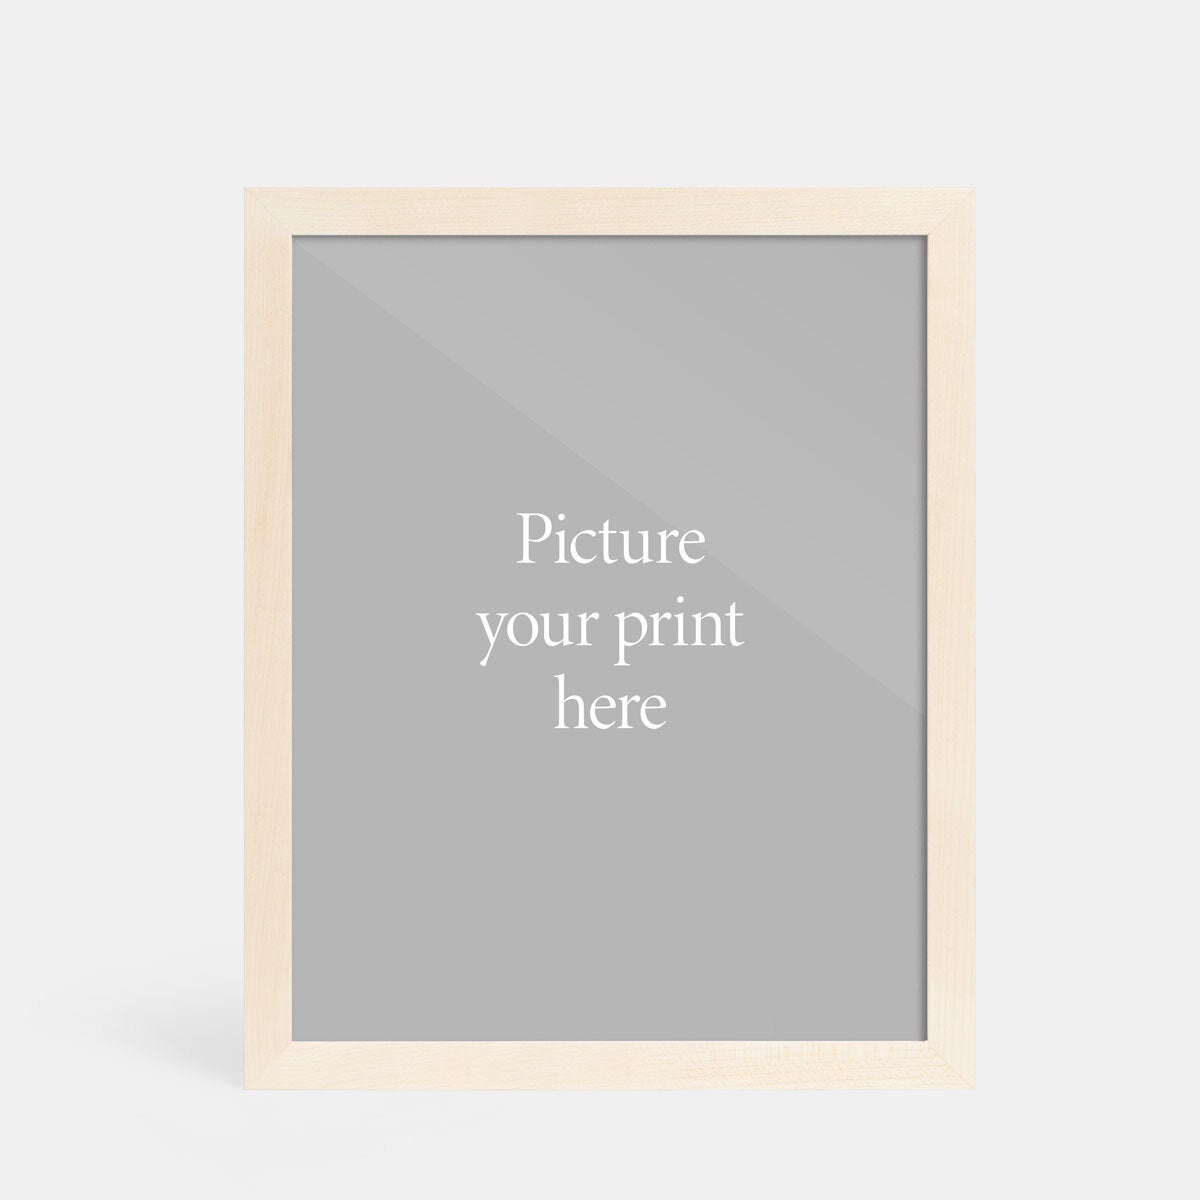 Gallery Frame Without Print by Artifact Uprising | Frames